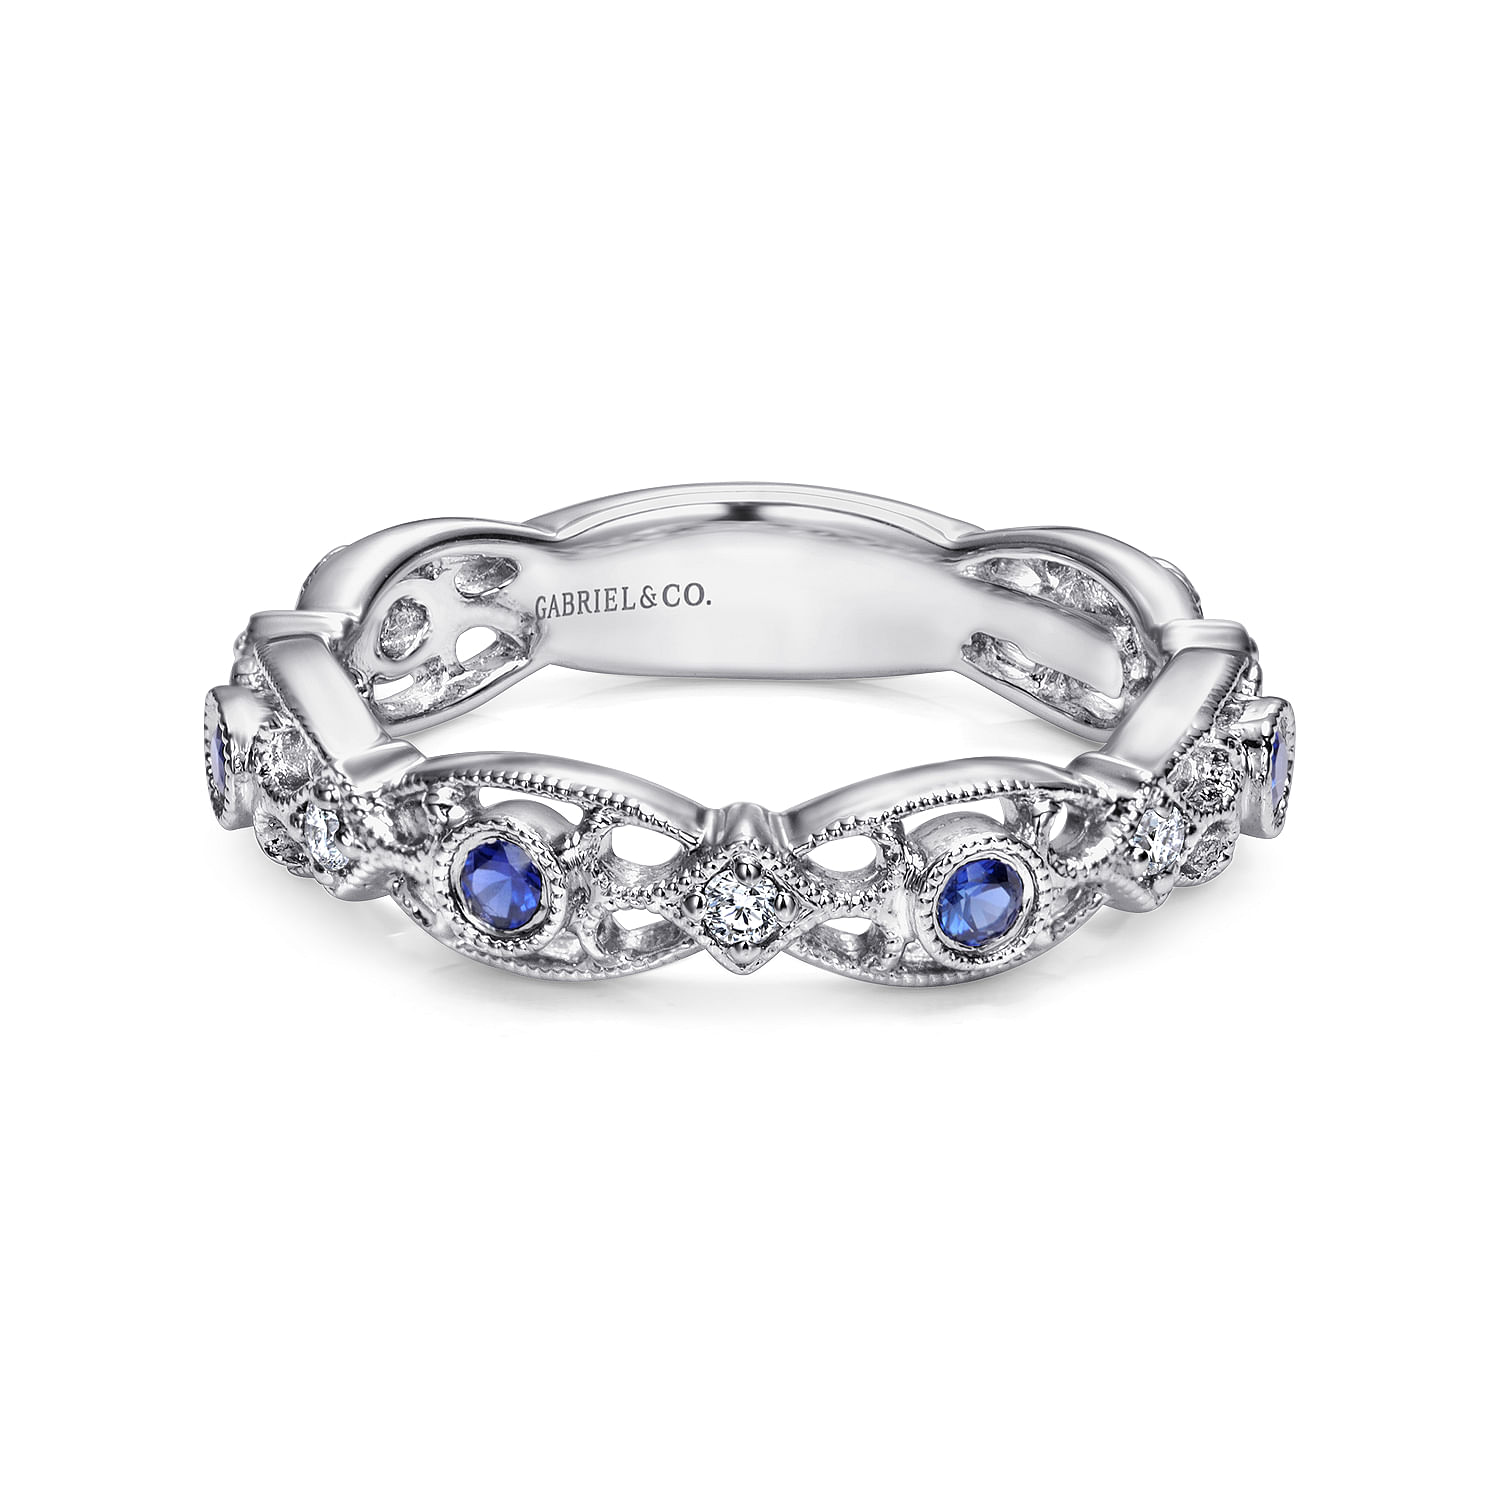 14K White Gold Filigree Band with Sapphire and Diamond Stations